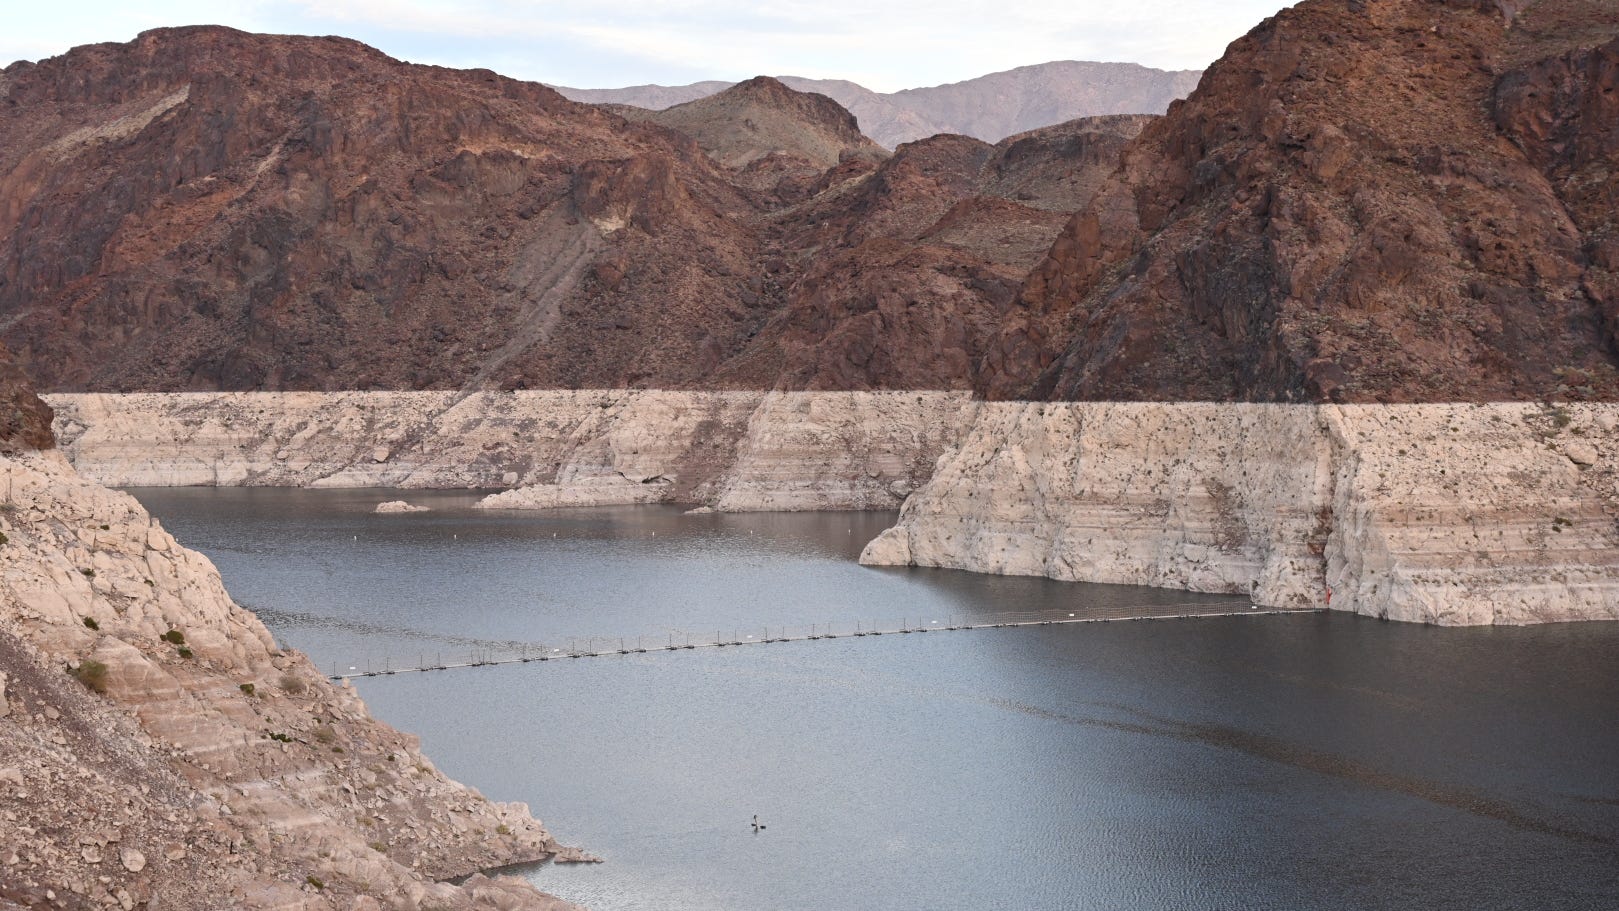 Risk of Colorado River shortage is on the rise, could hit within 5 years, officials say - The Arizona Republic